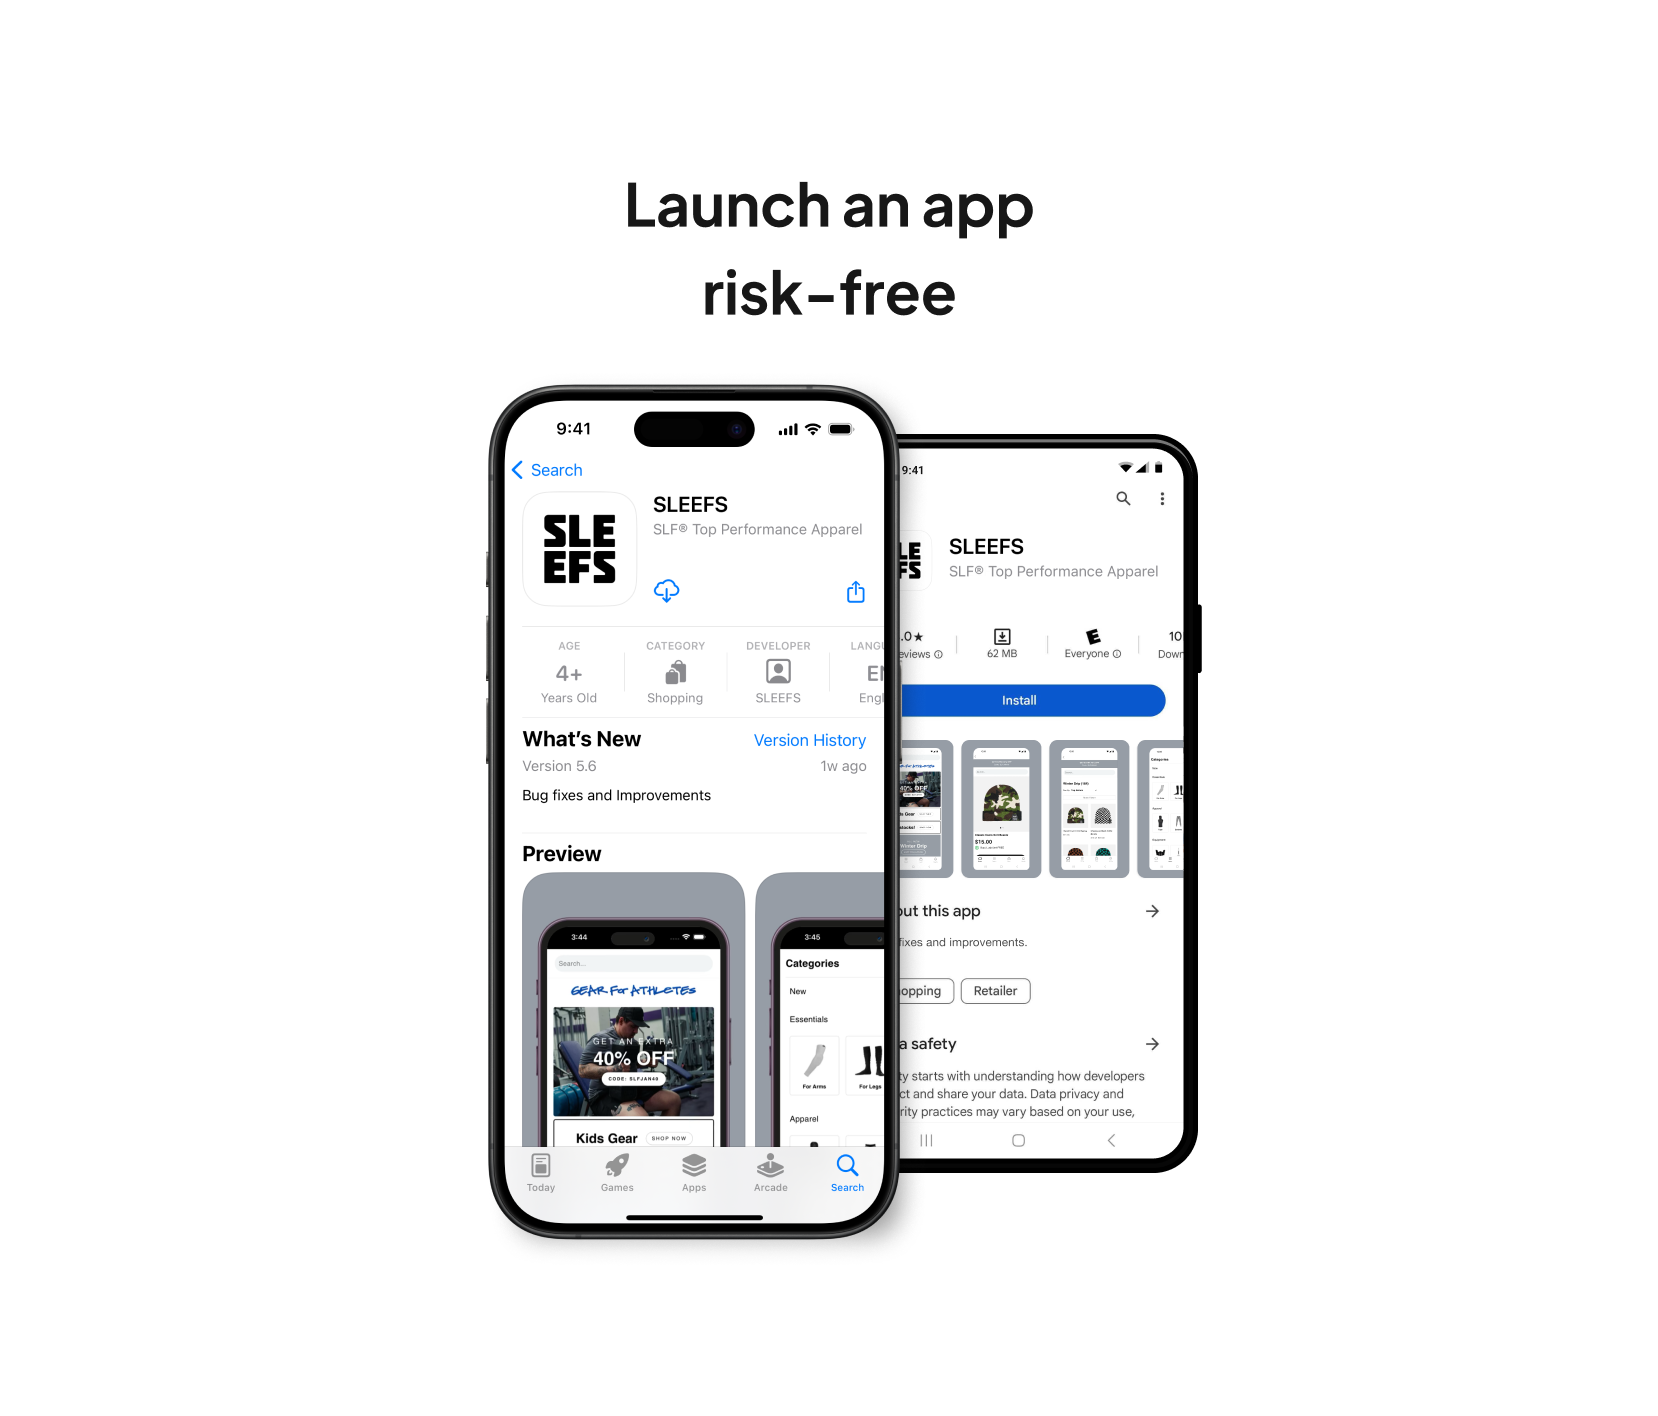 <strong>The risk-free way to launch an app</strong> - You get an app at an affordable cost, with no long-term contracts and a 60 day money back guarantee.